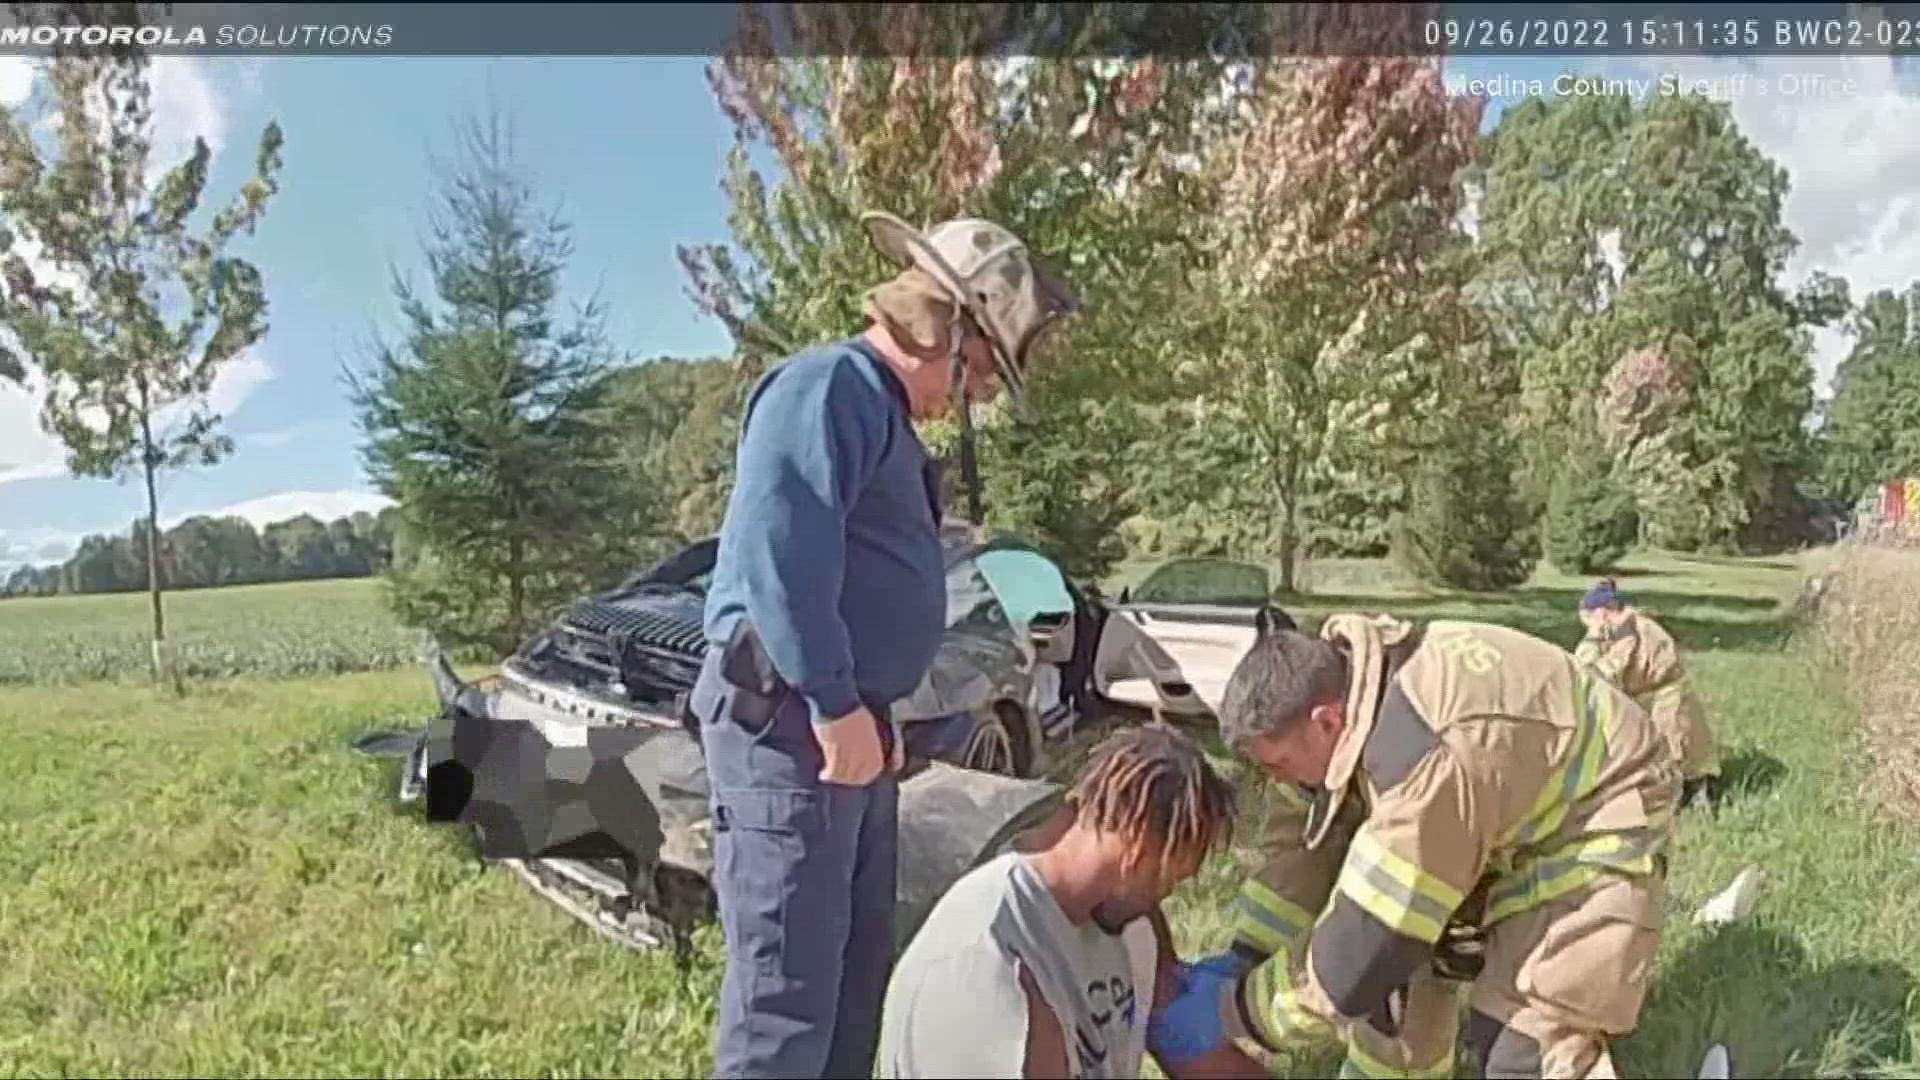 In the footage, first responders help Garrett to his feet while blood gushes from his right hand. His female passenger was also hurt and lying on the ground.